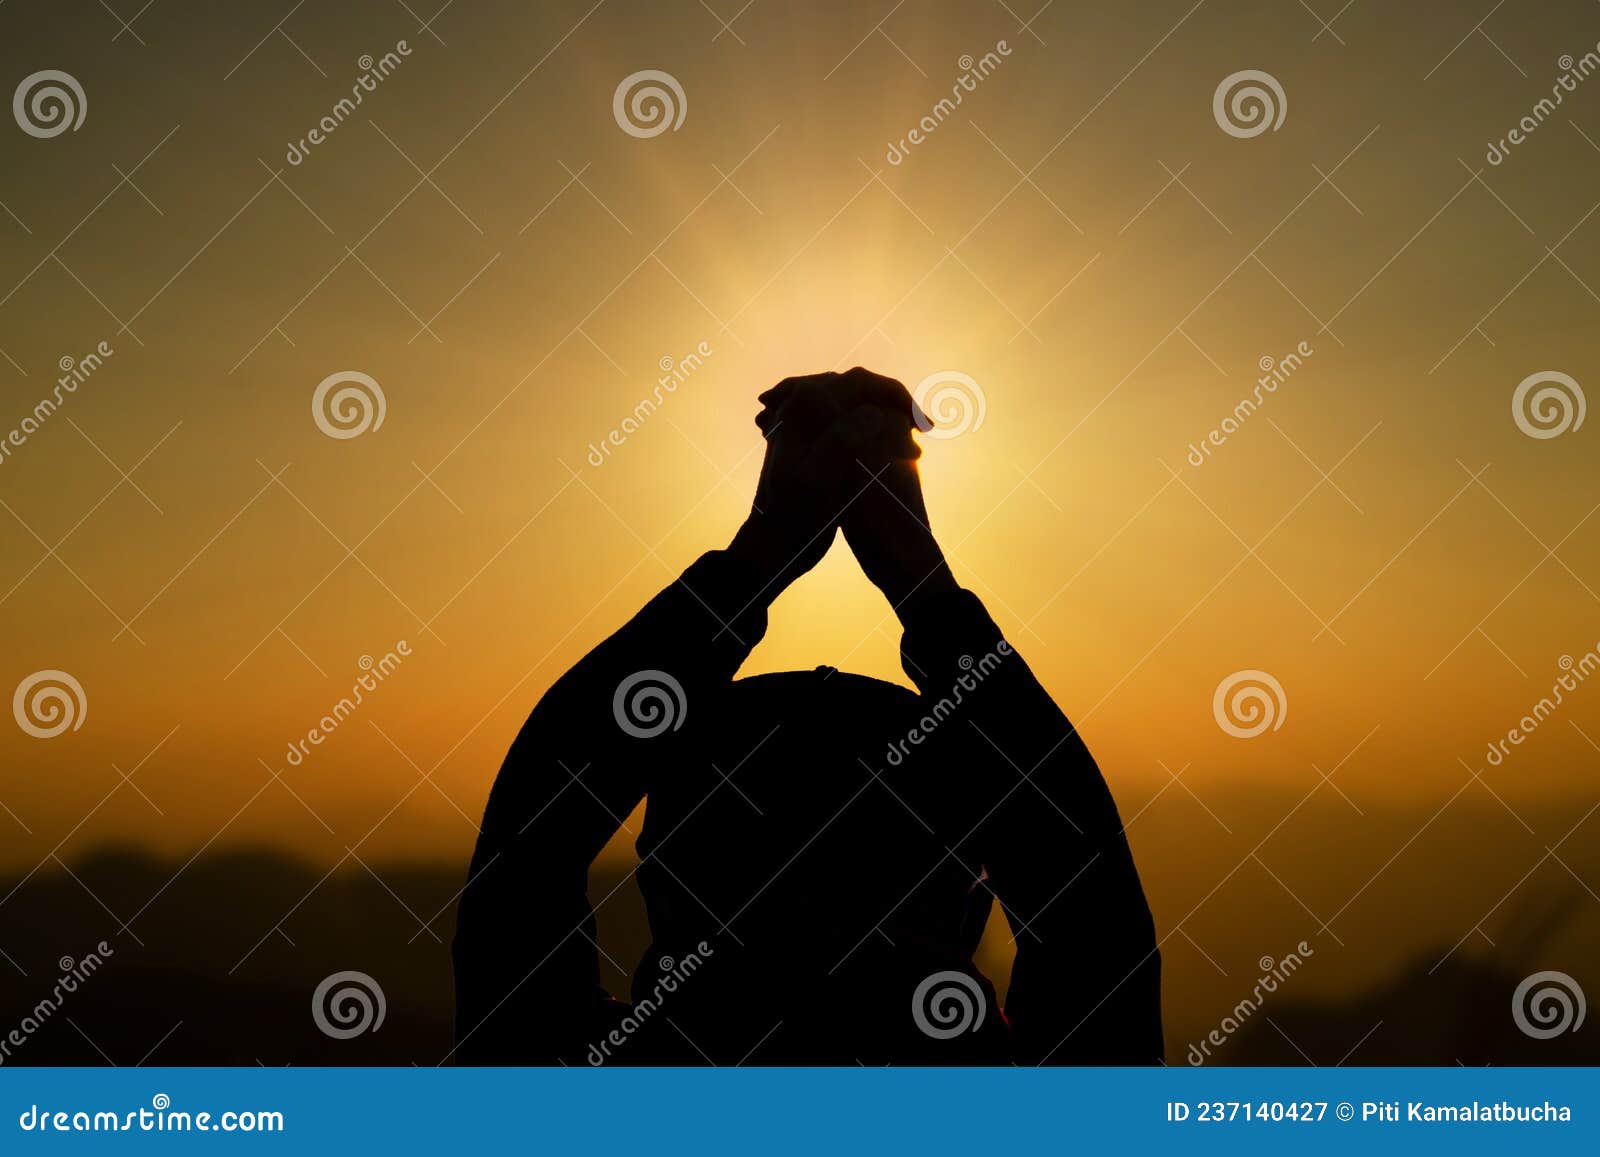 Man Praying Meditating In Harmony And Peace At Sunset Religion